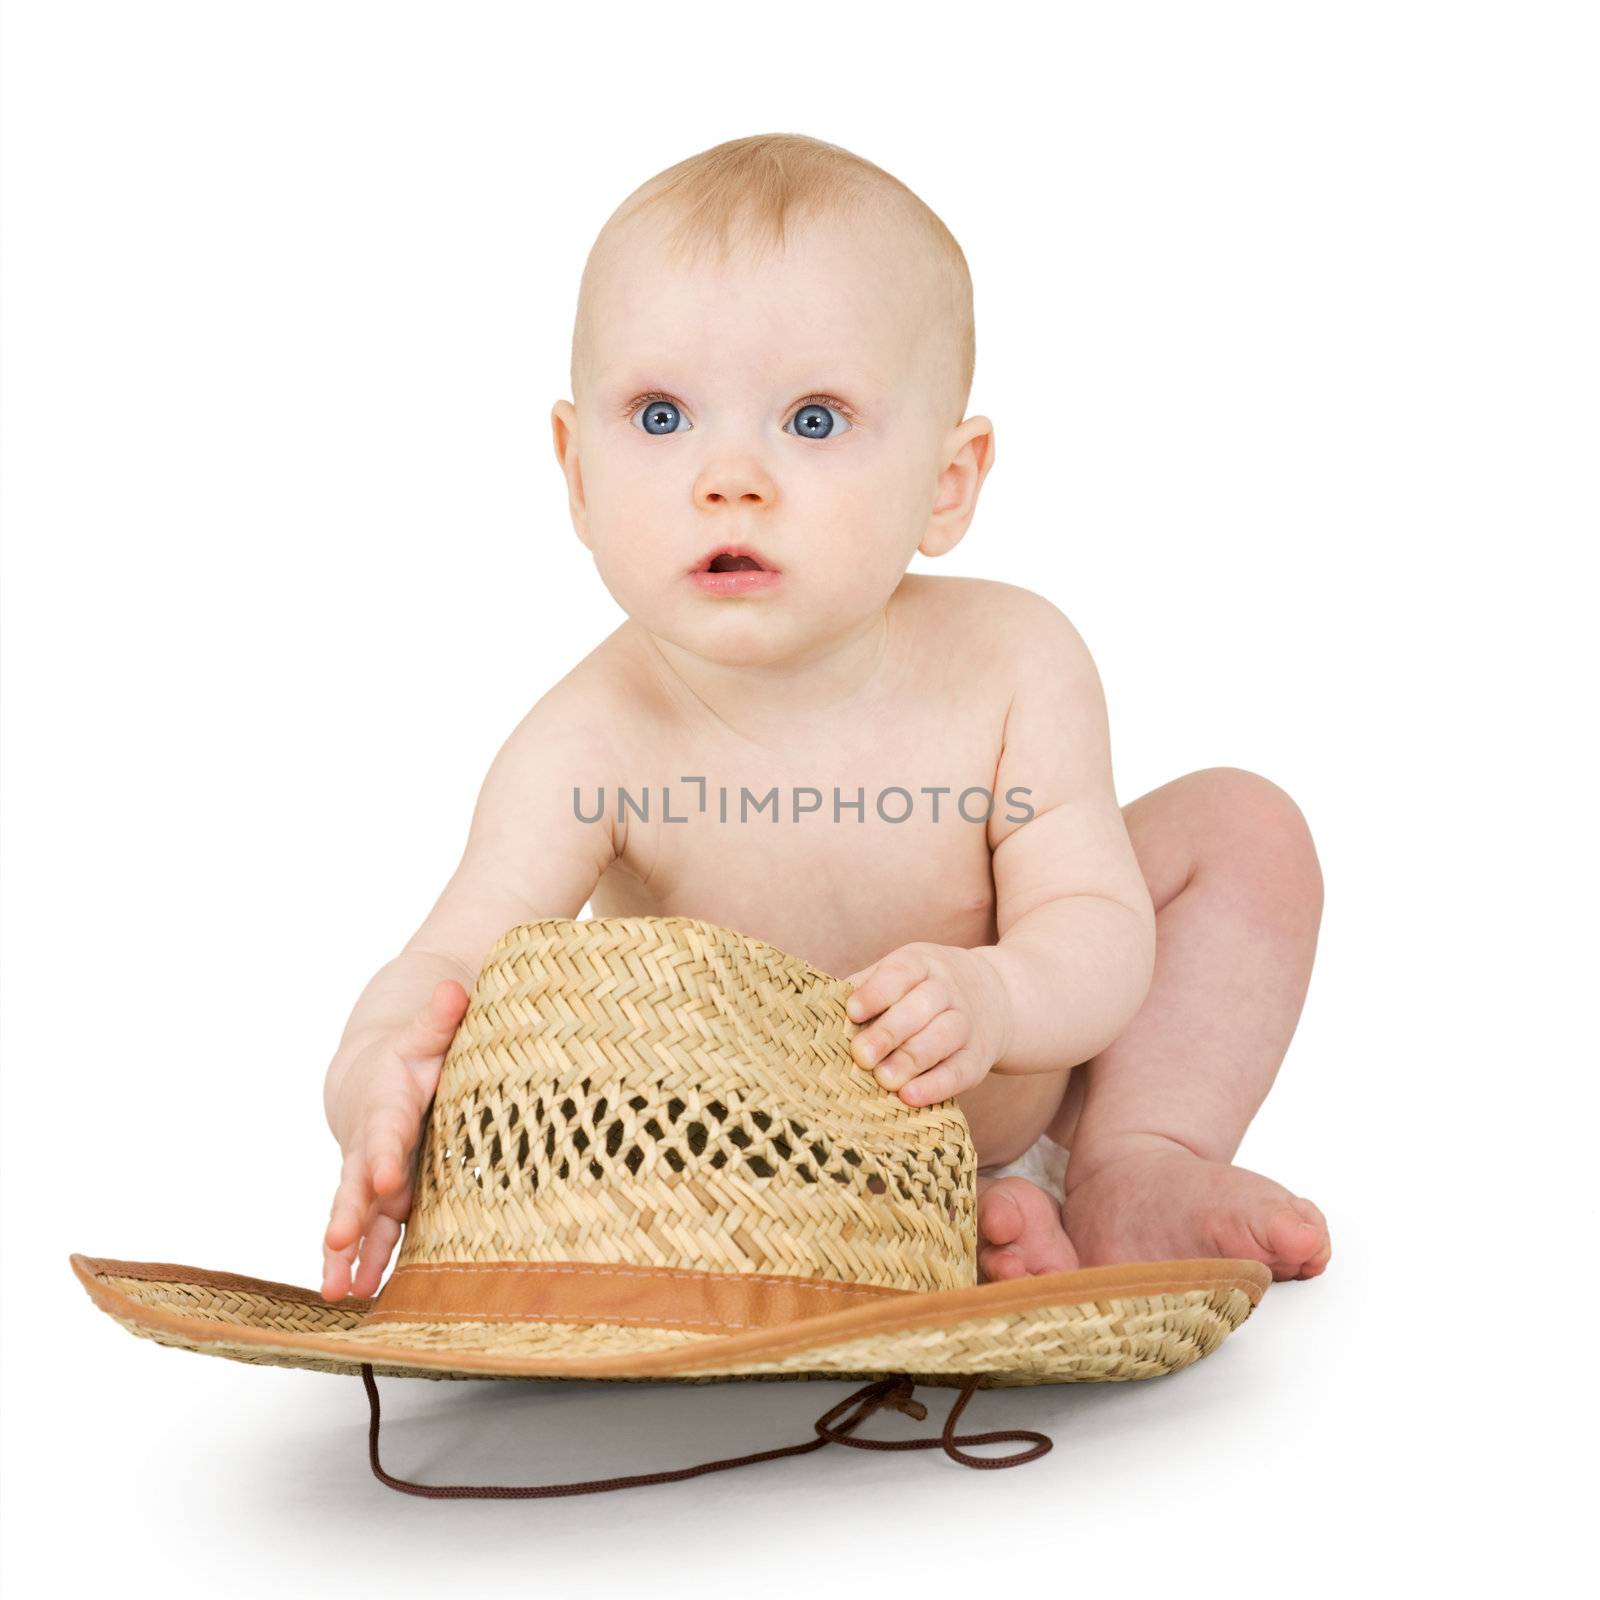 Infant with straw cowboy hat by pzaxe